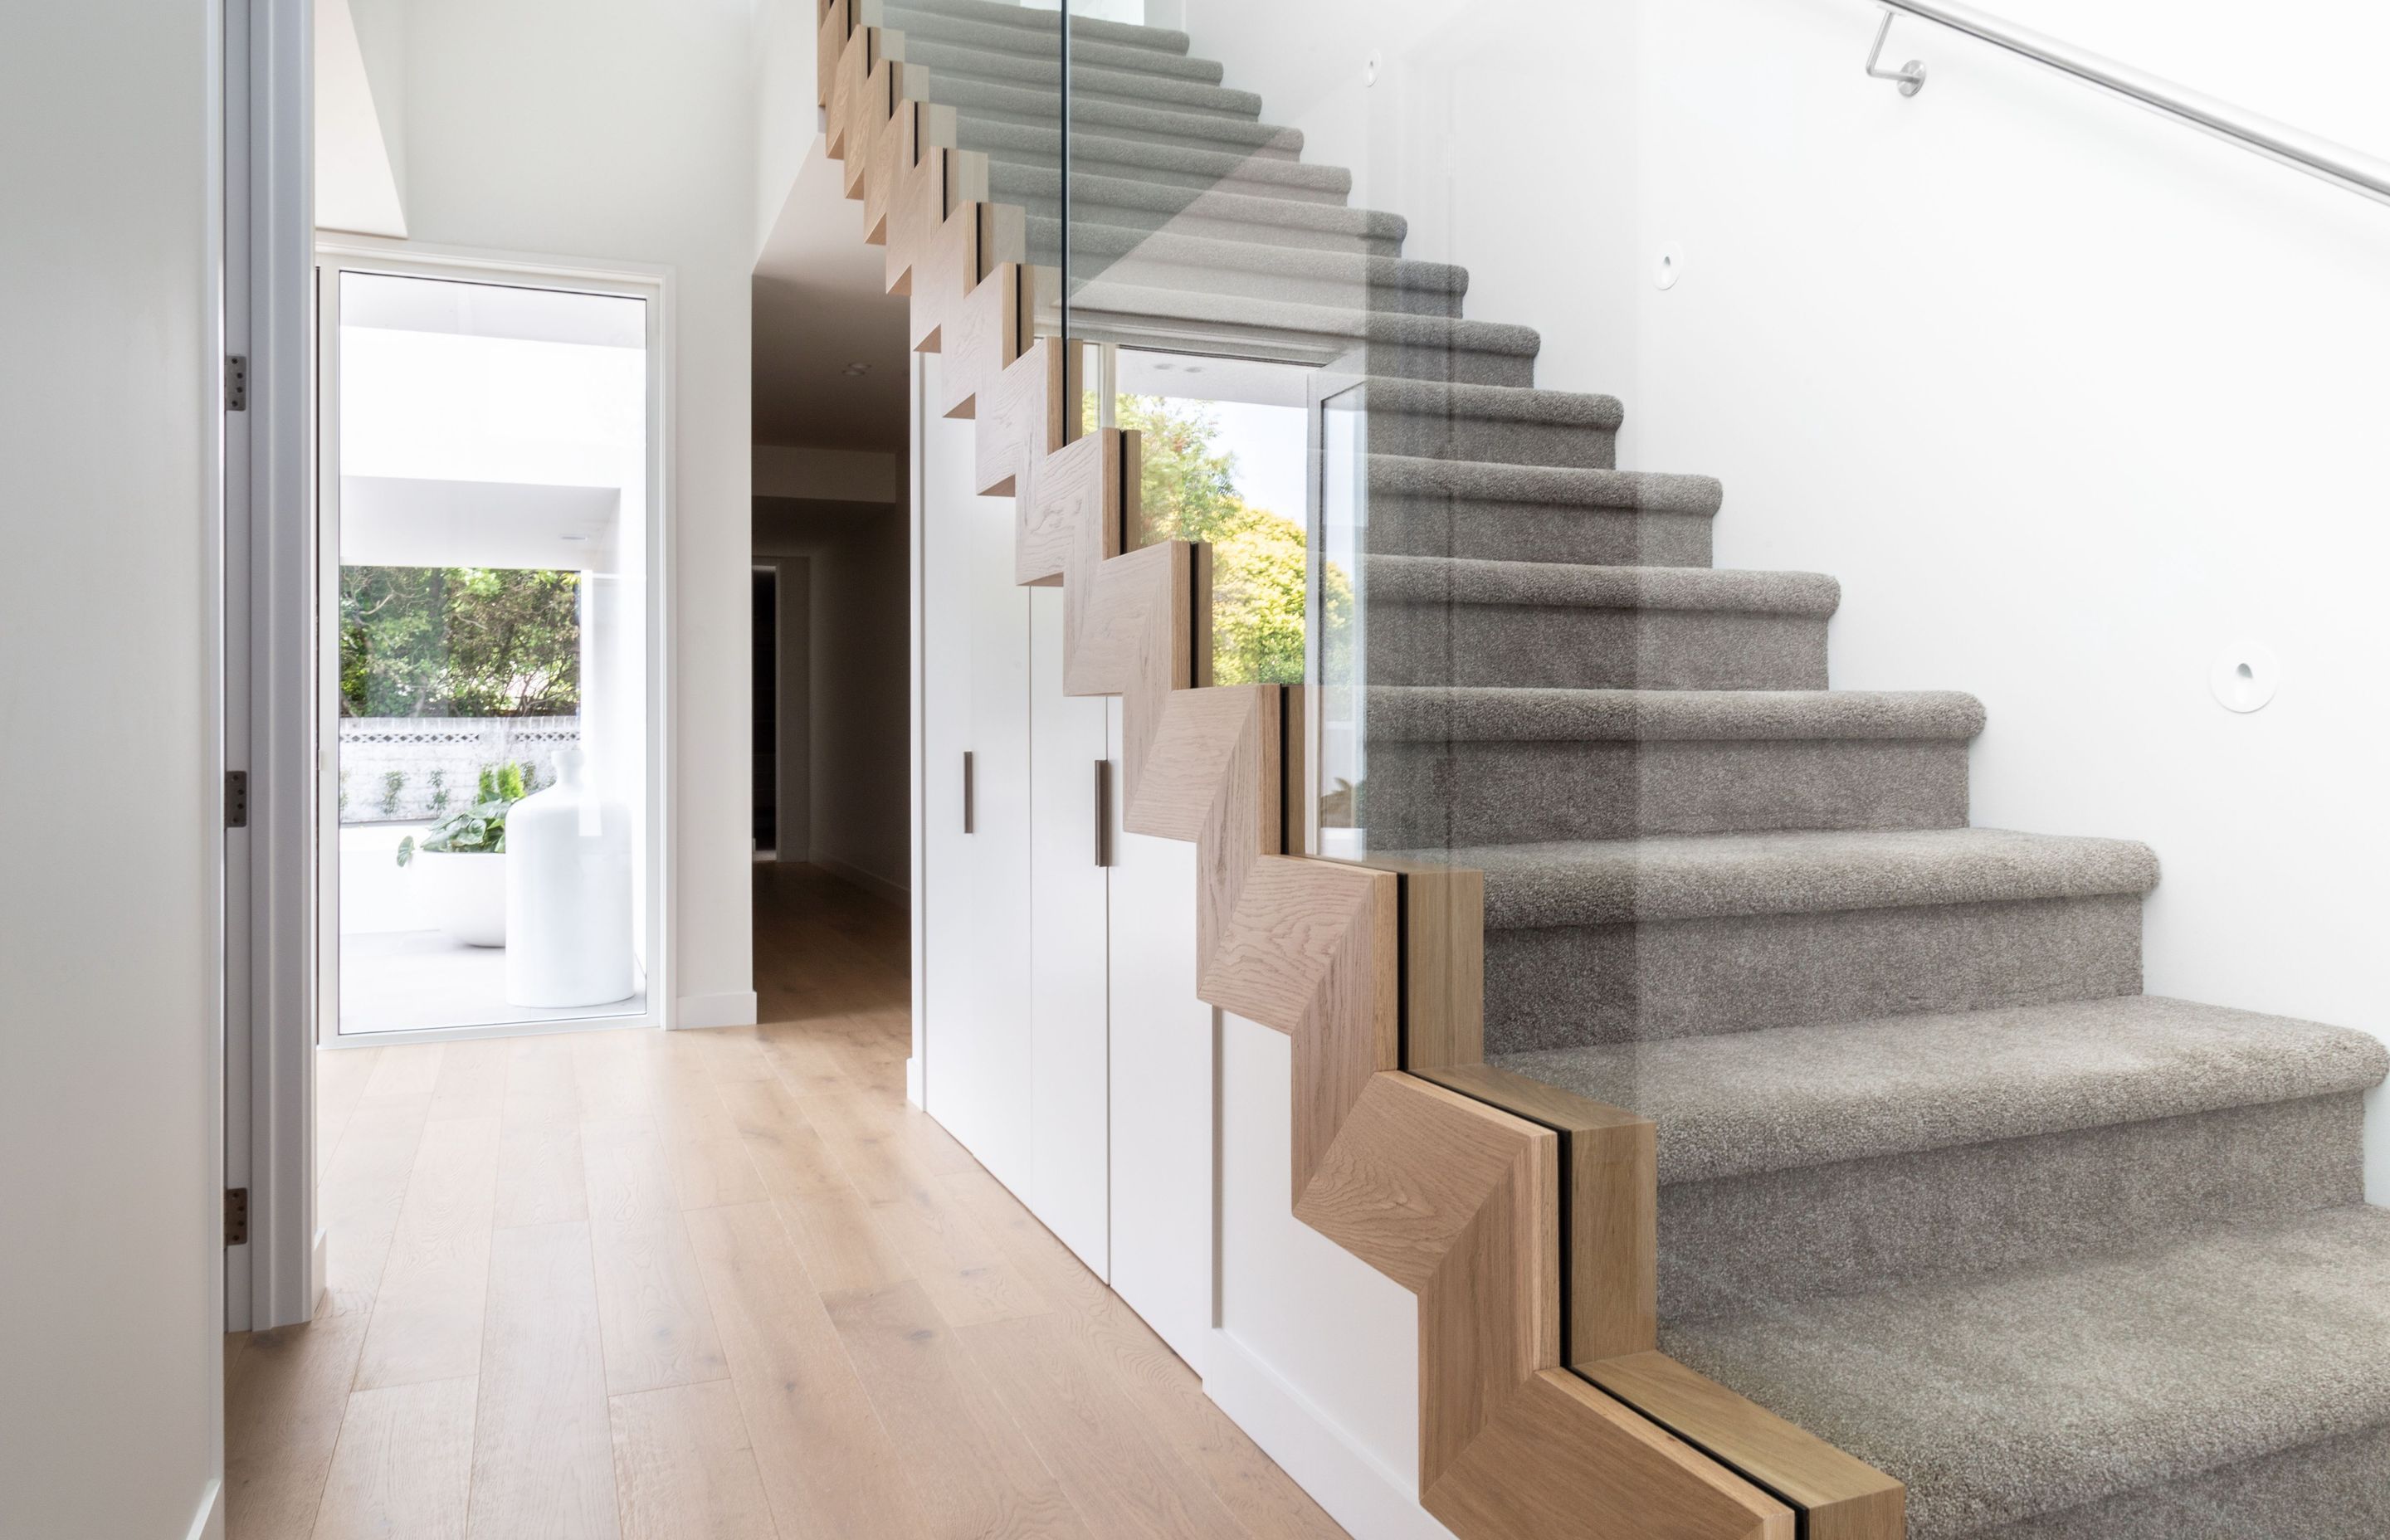 The stairway features a beautiful timber detailing that ties it into the warm oak floor.